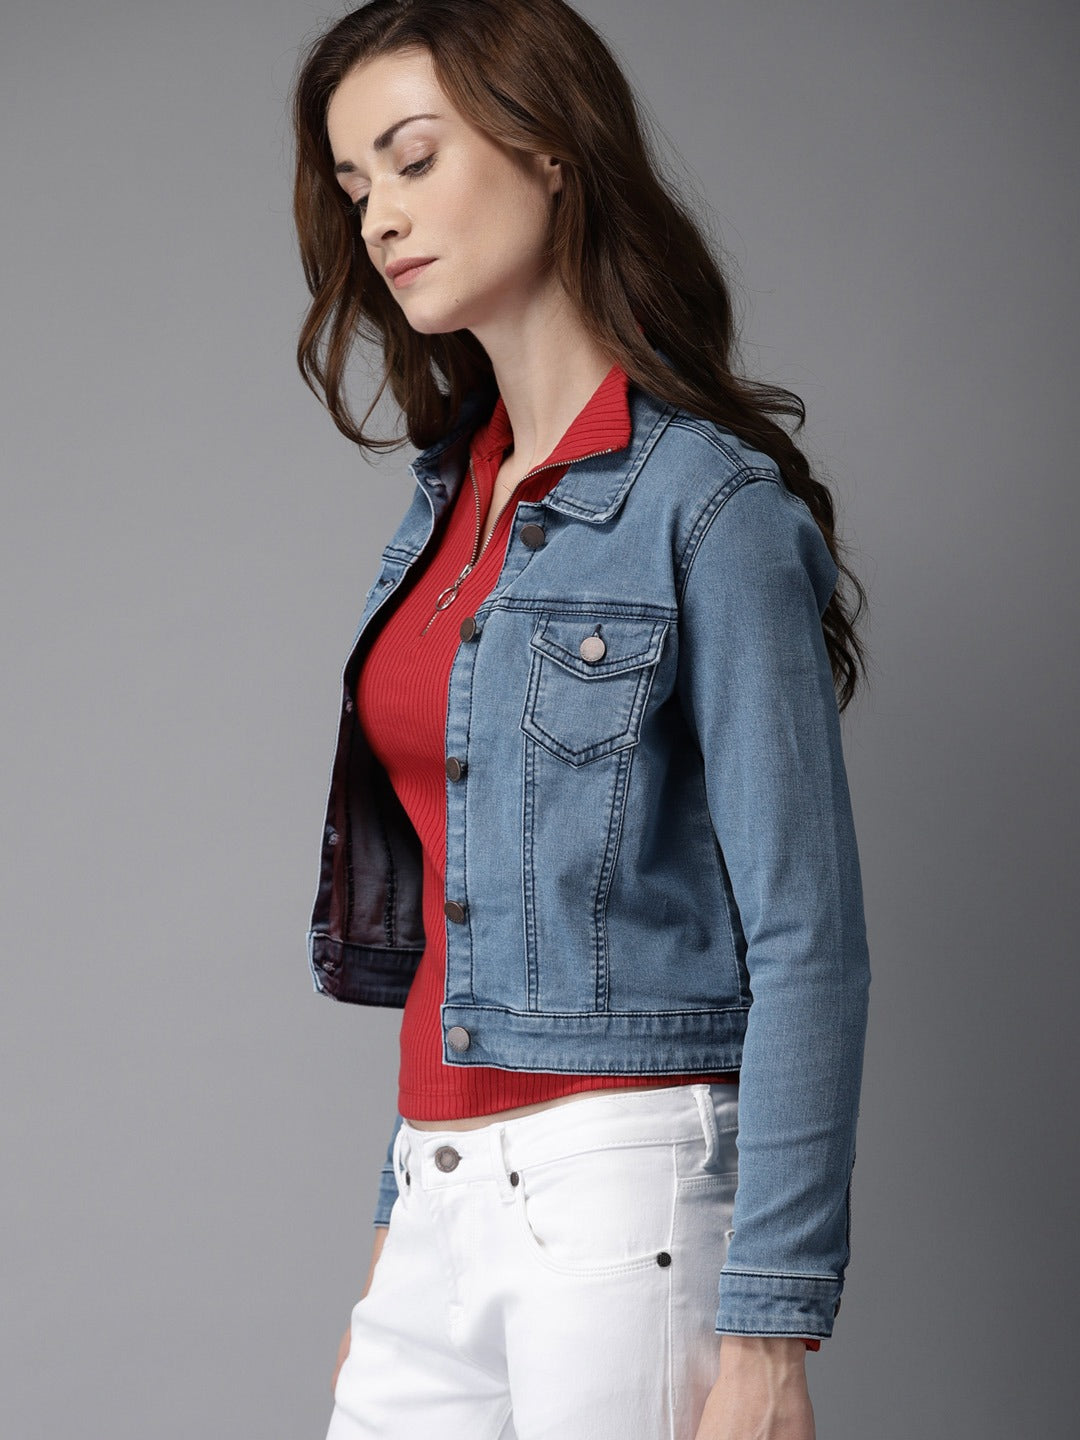 Woman's blue denim jacket, red top, white jeans